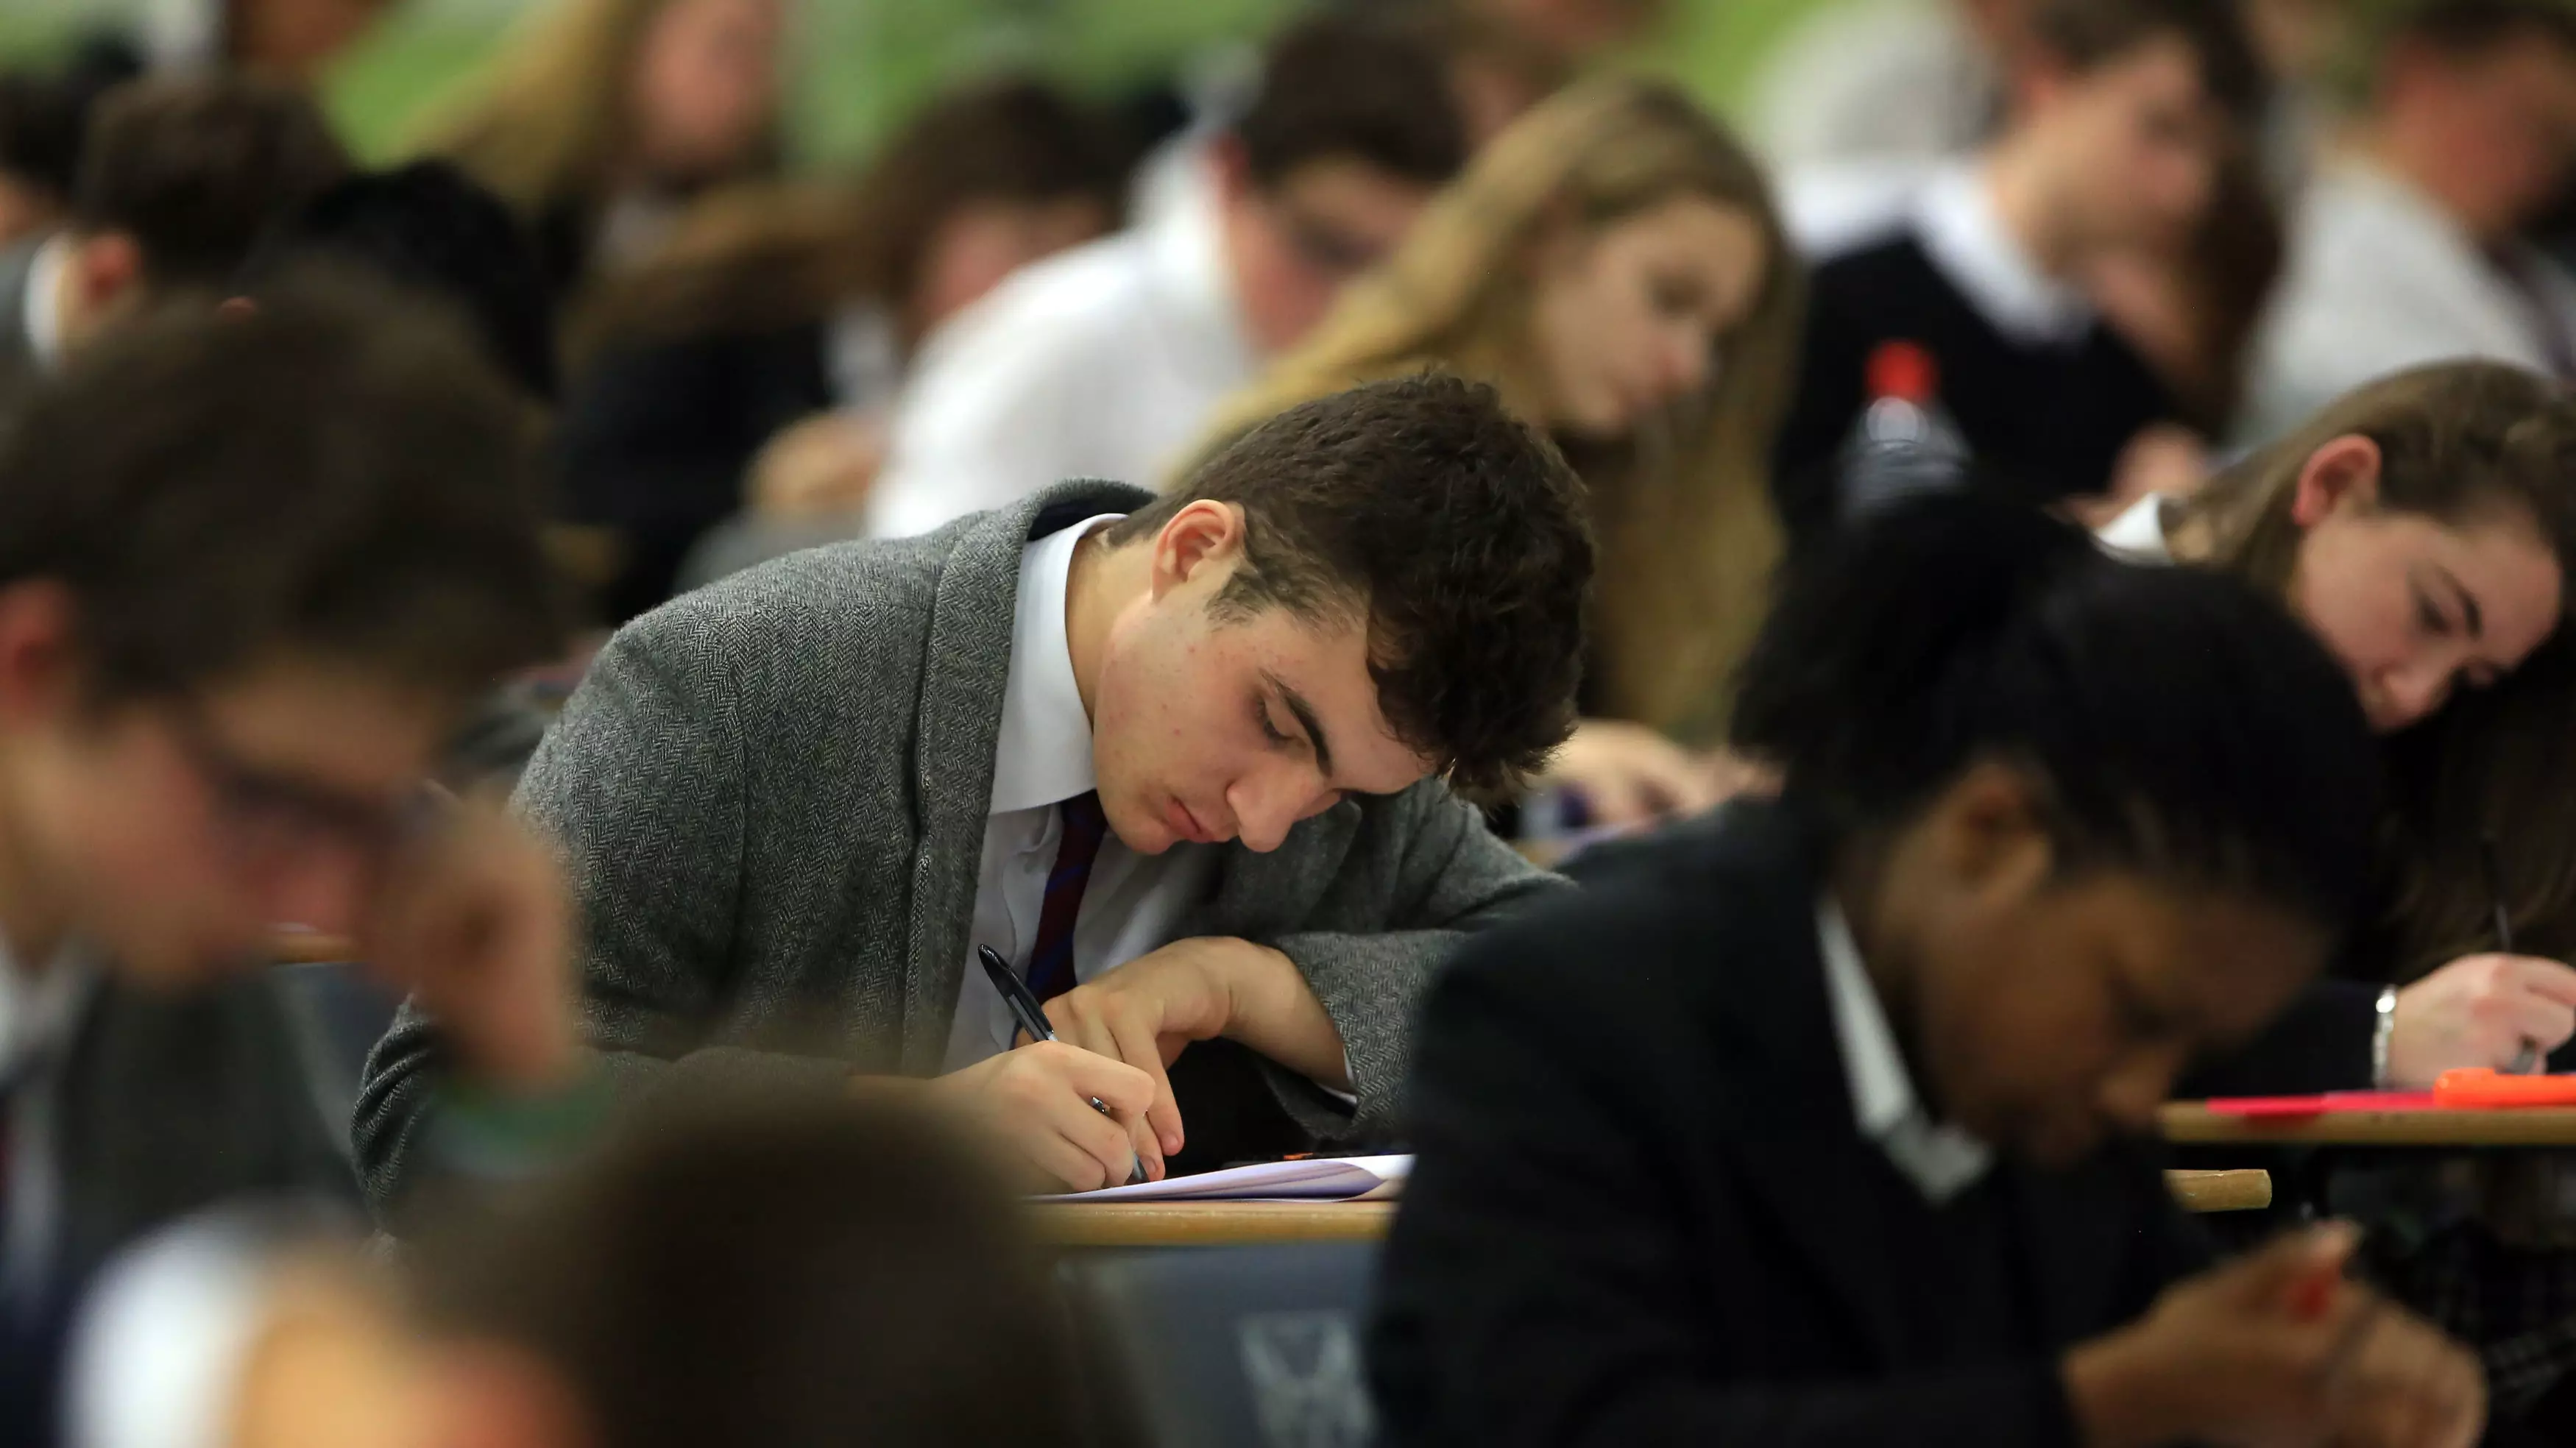 Could You Pass This Year's GCSE Exams?